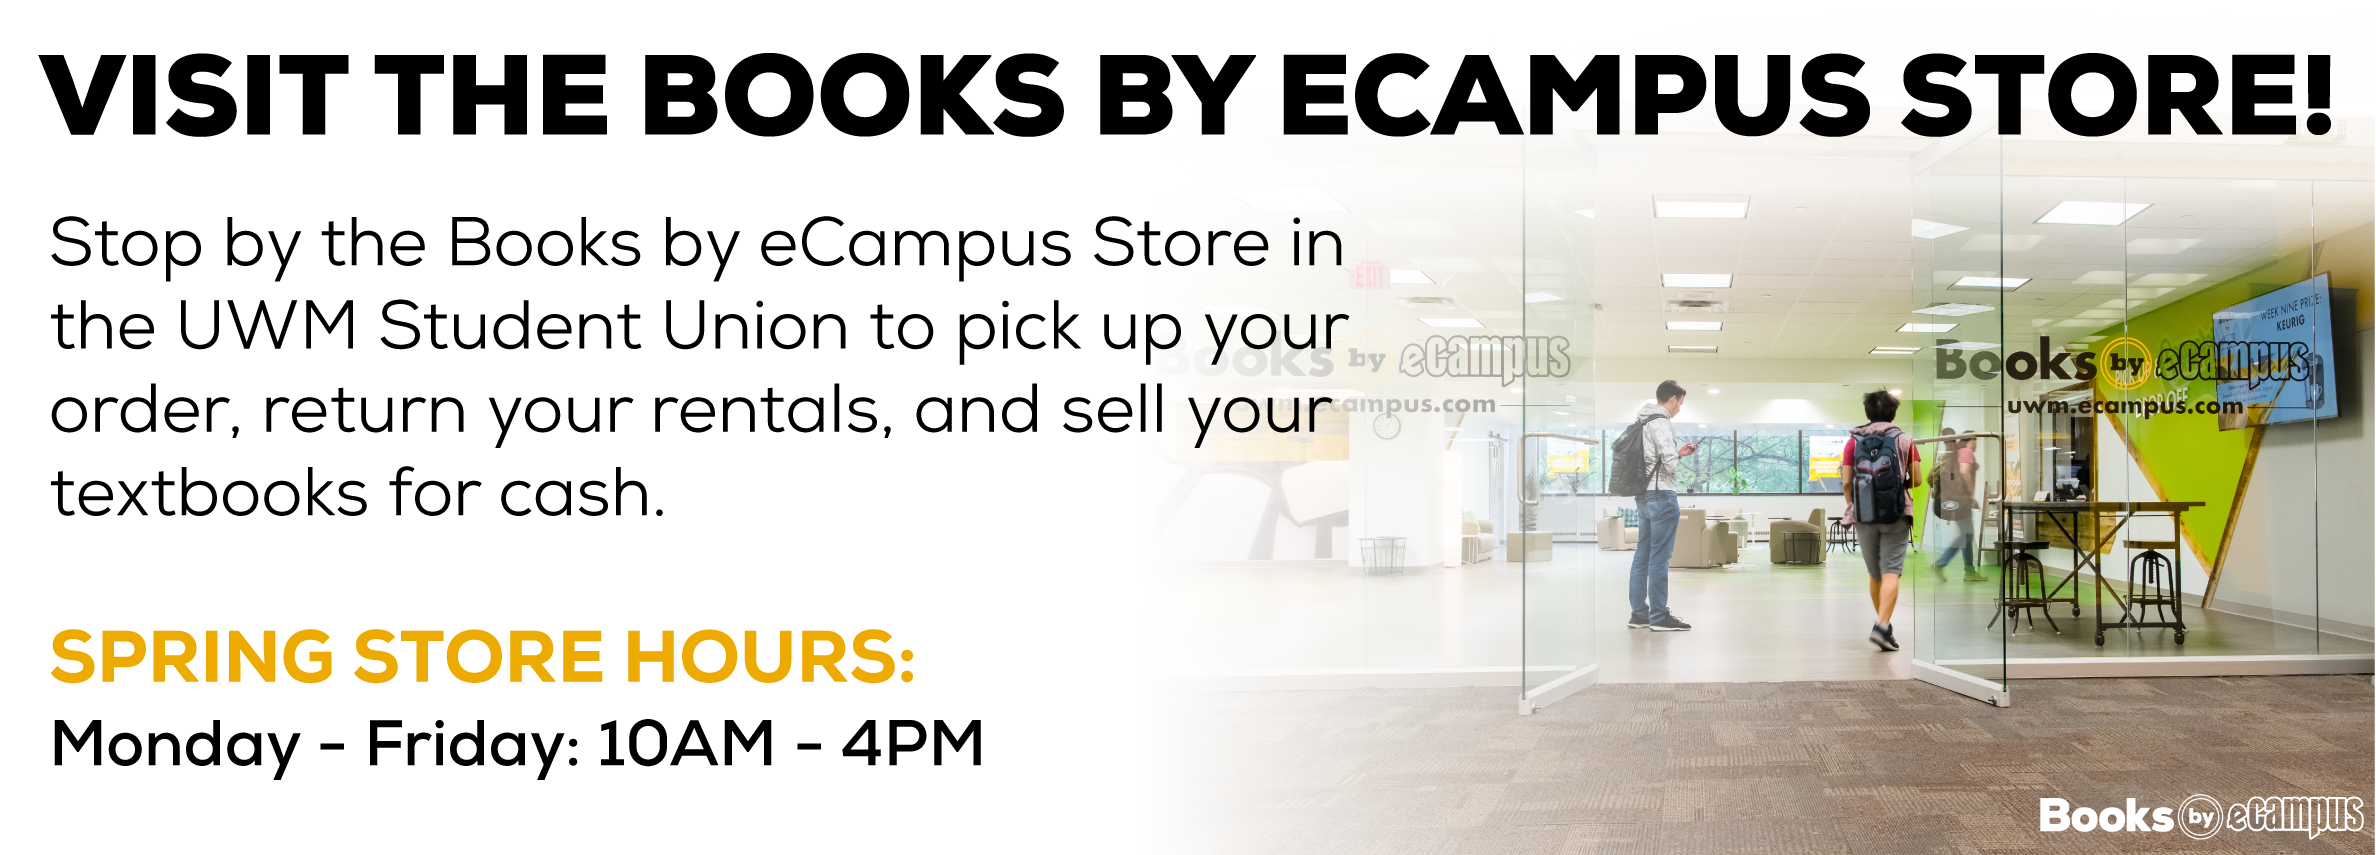 Visit the Books by eCampus Store